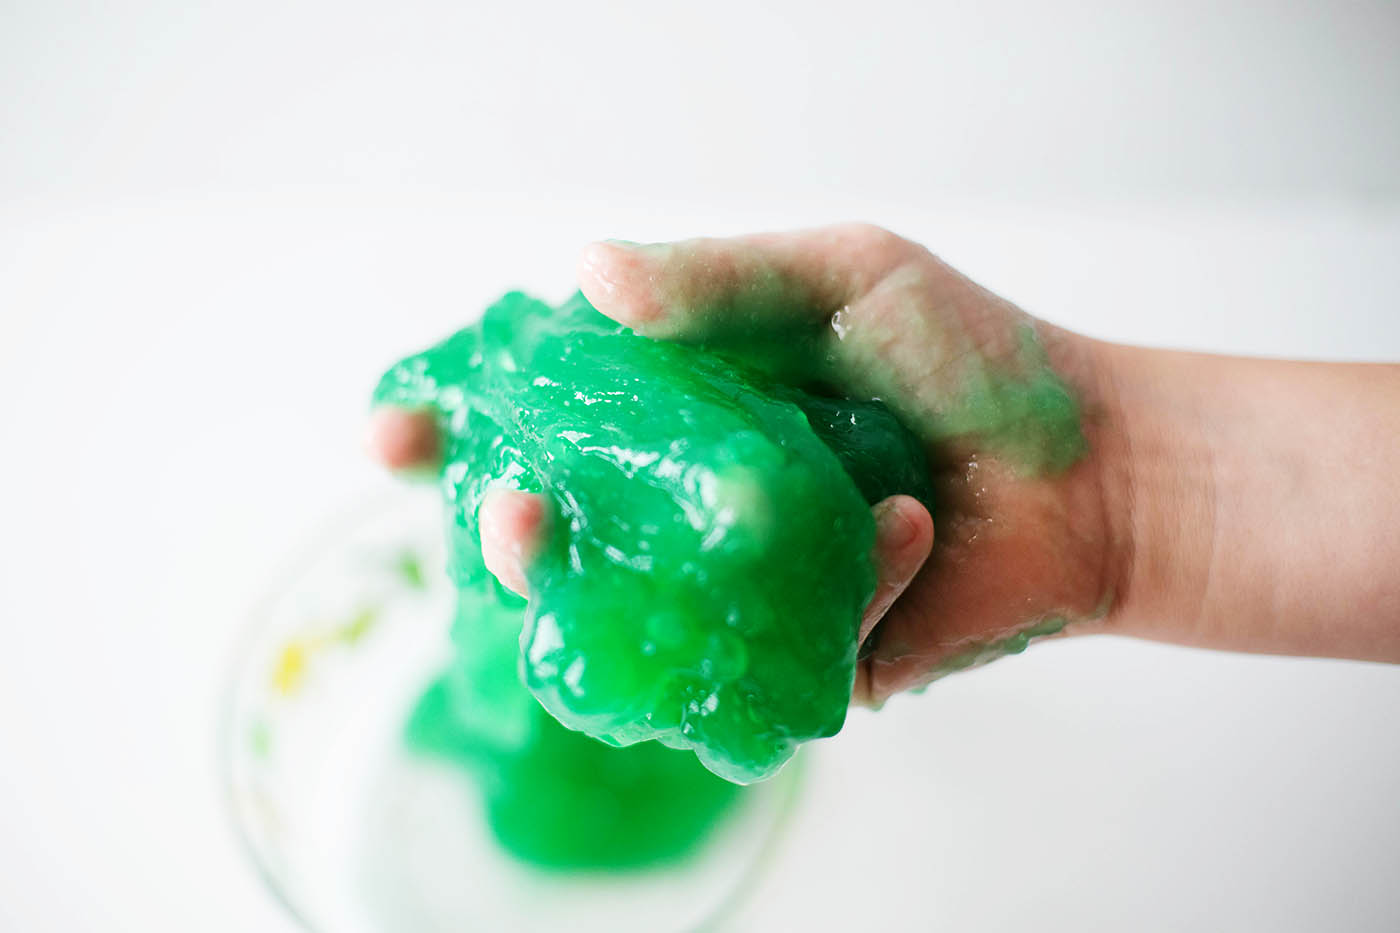 An easy and safe slime recipe using only 3 food safe ingredients. Nice and slimy, sticky and stretchy!